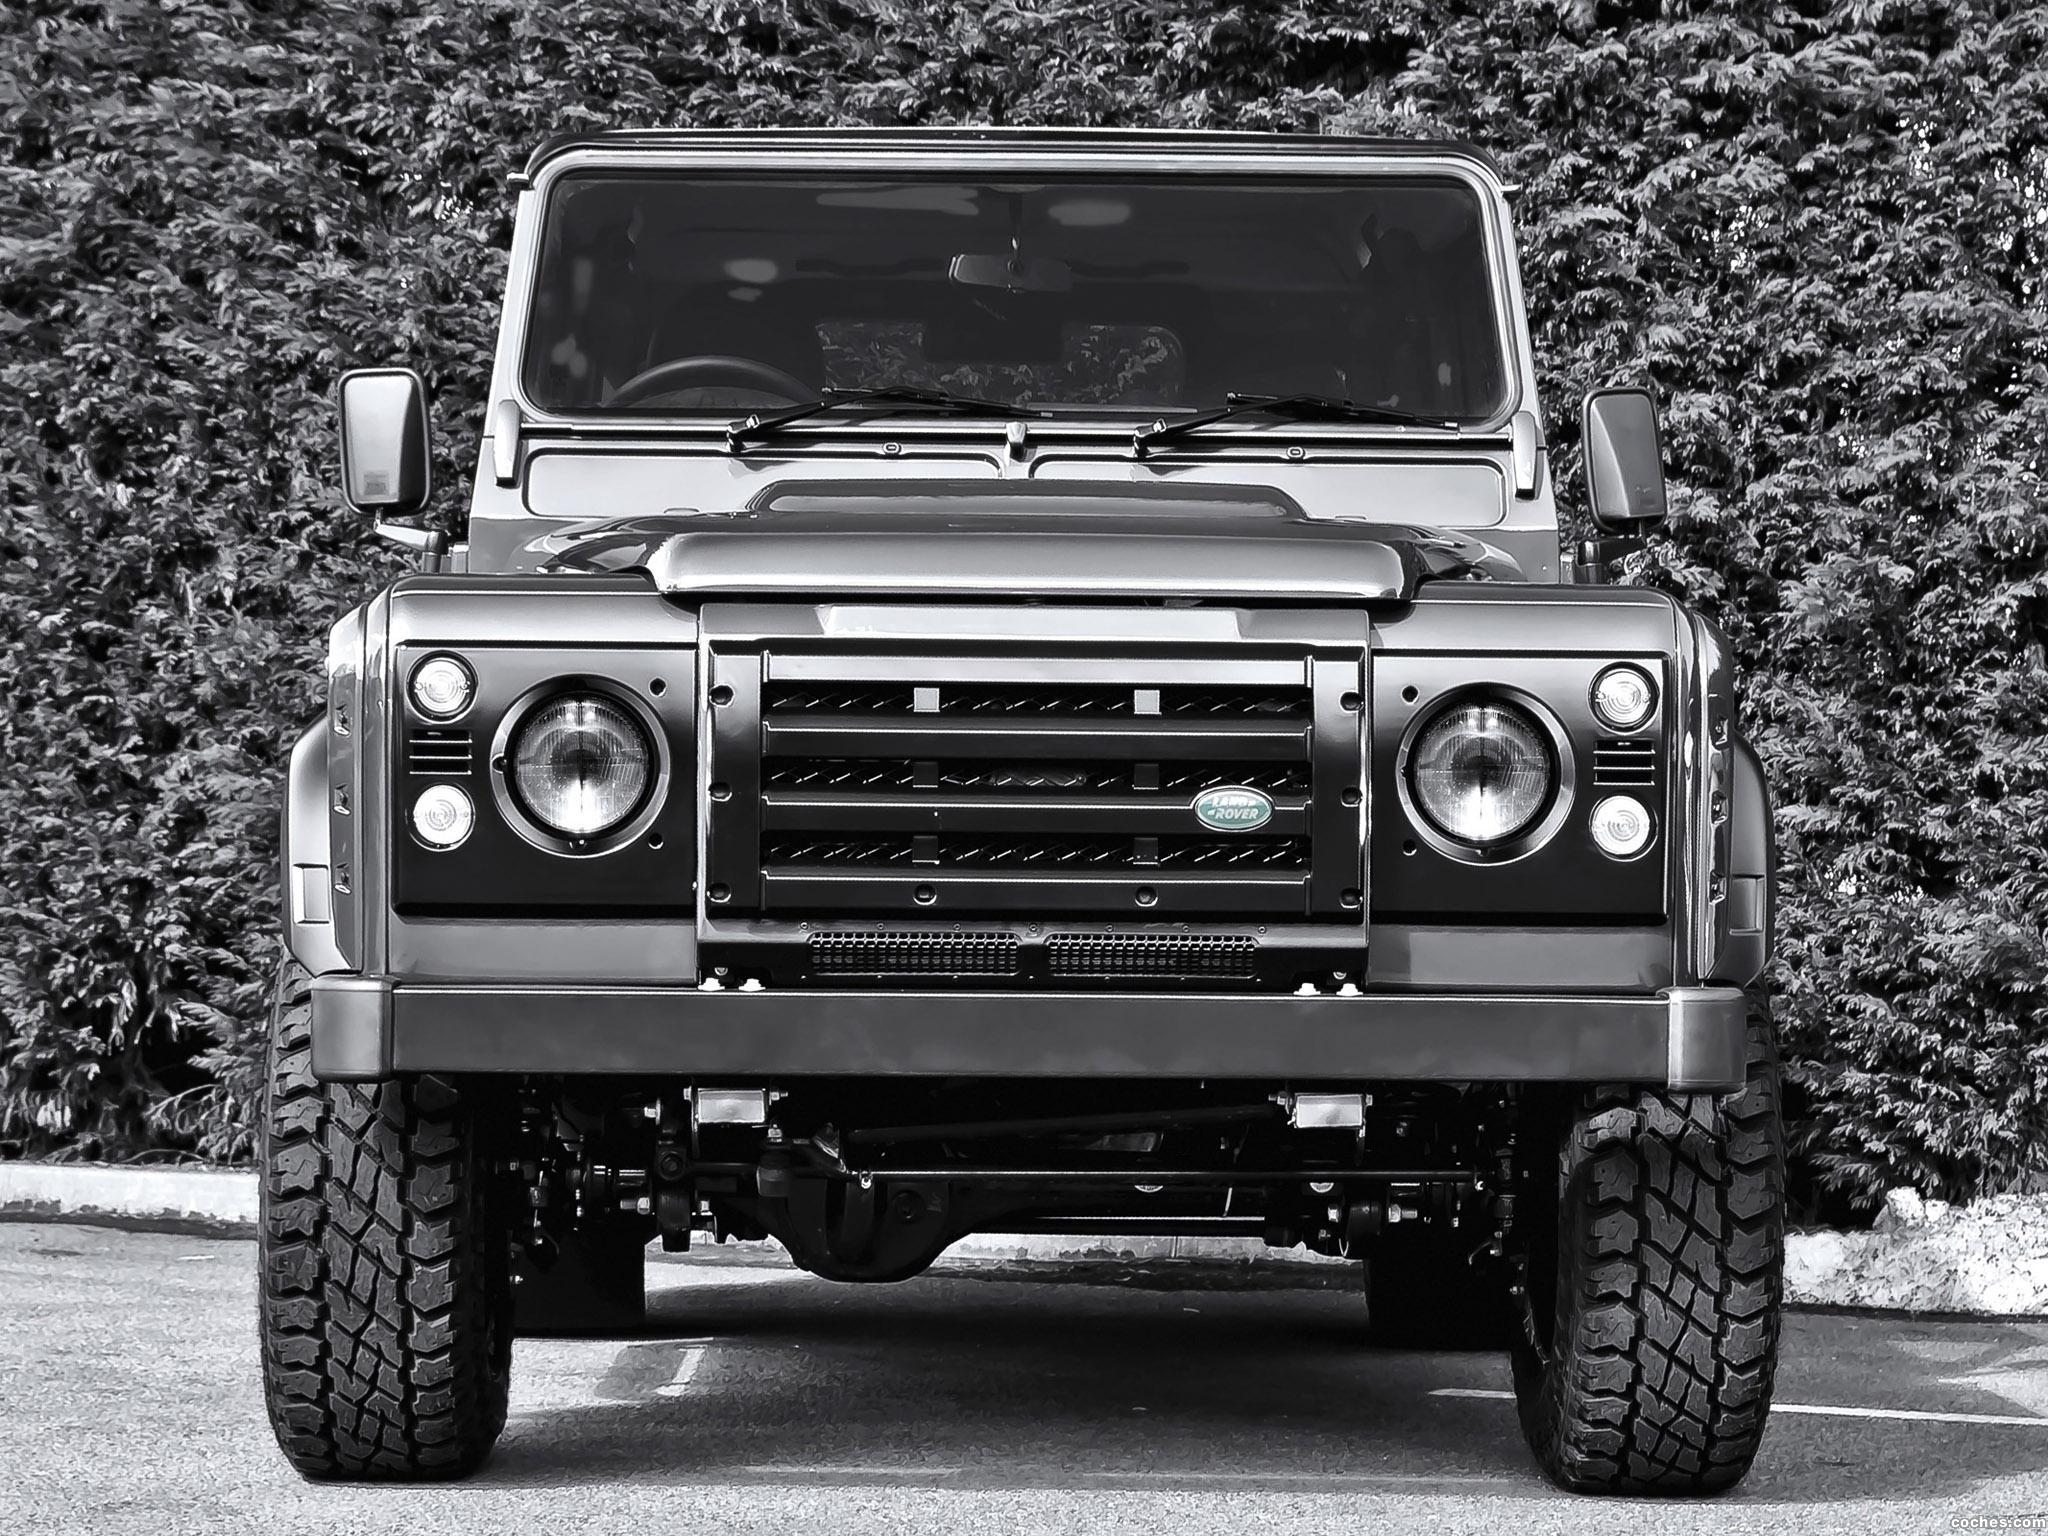 project-kahn_land-rover-chelsea-wide-track-military-grey-defender-2013_r2